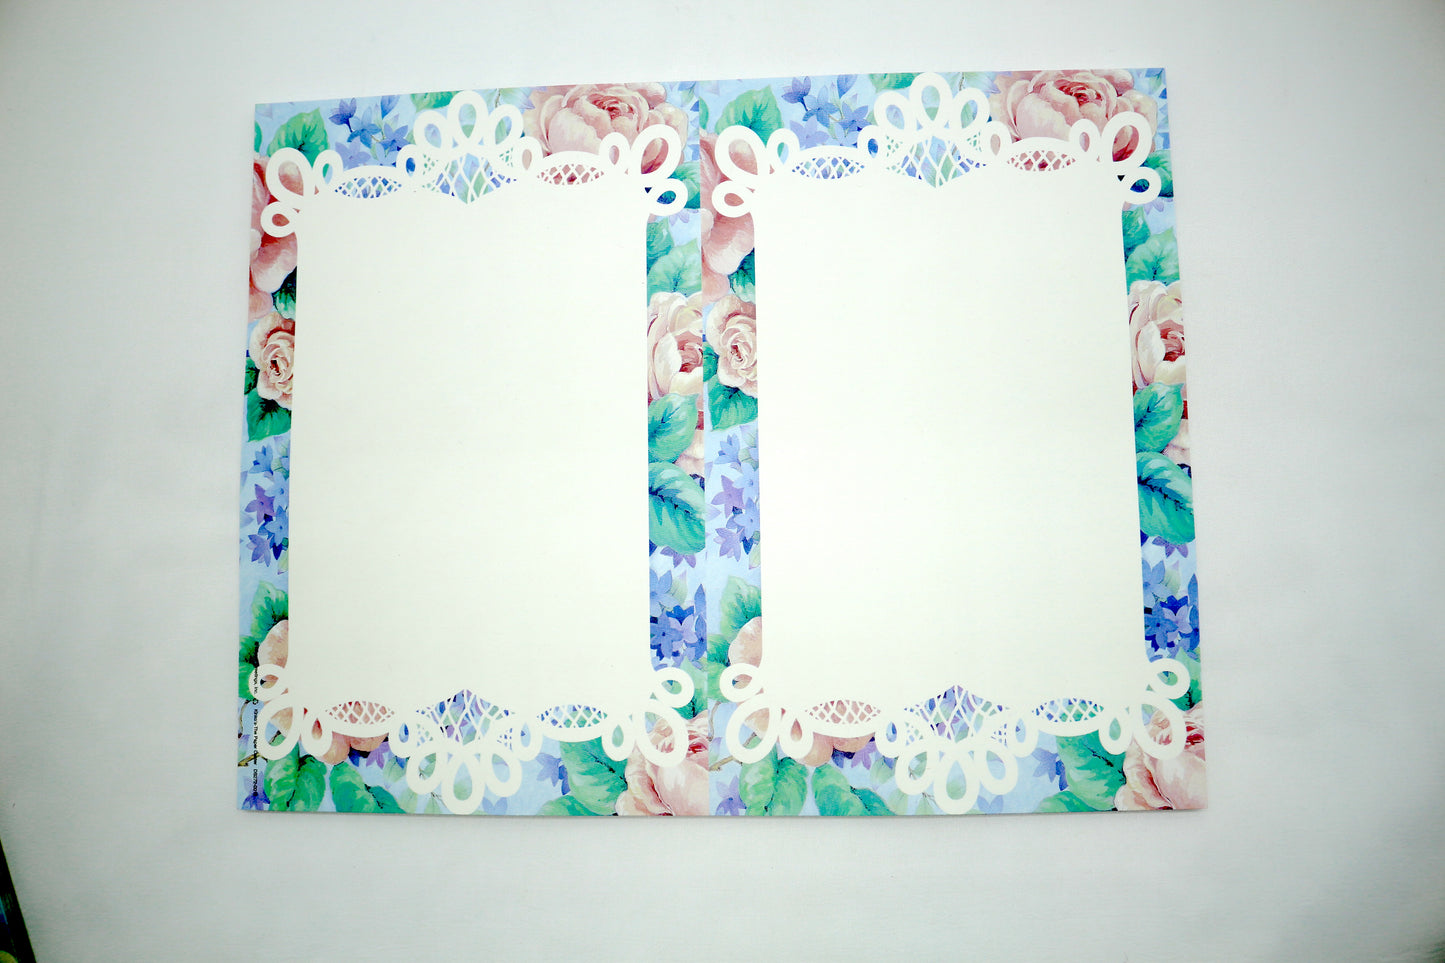 1-Flower Frame Announcements Card, Note Cards, Garden Party Invites